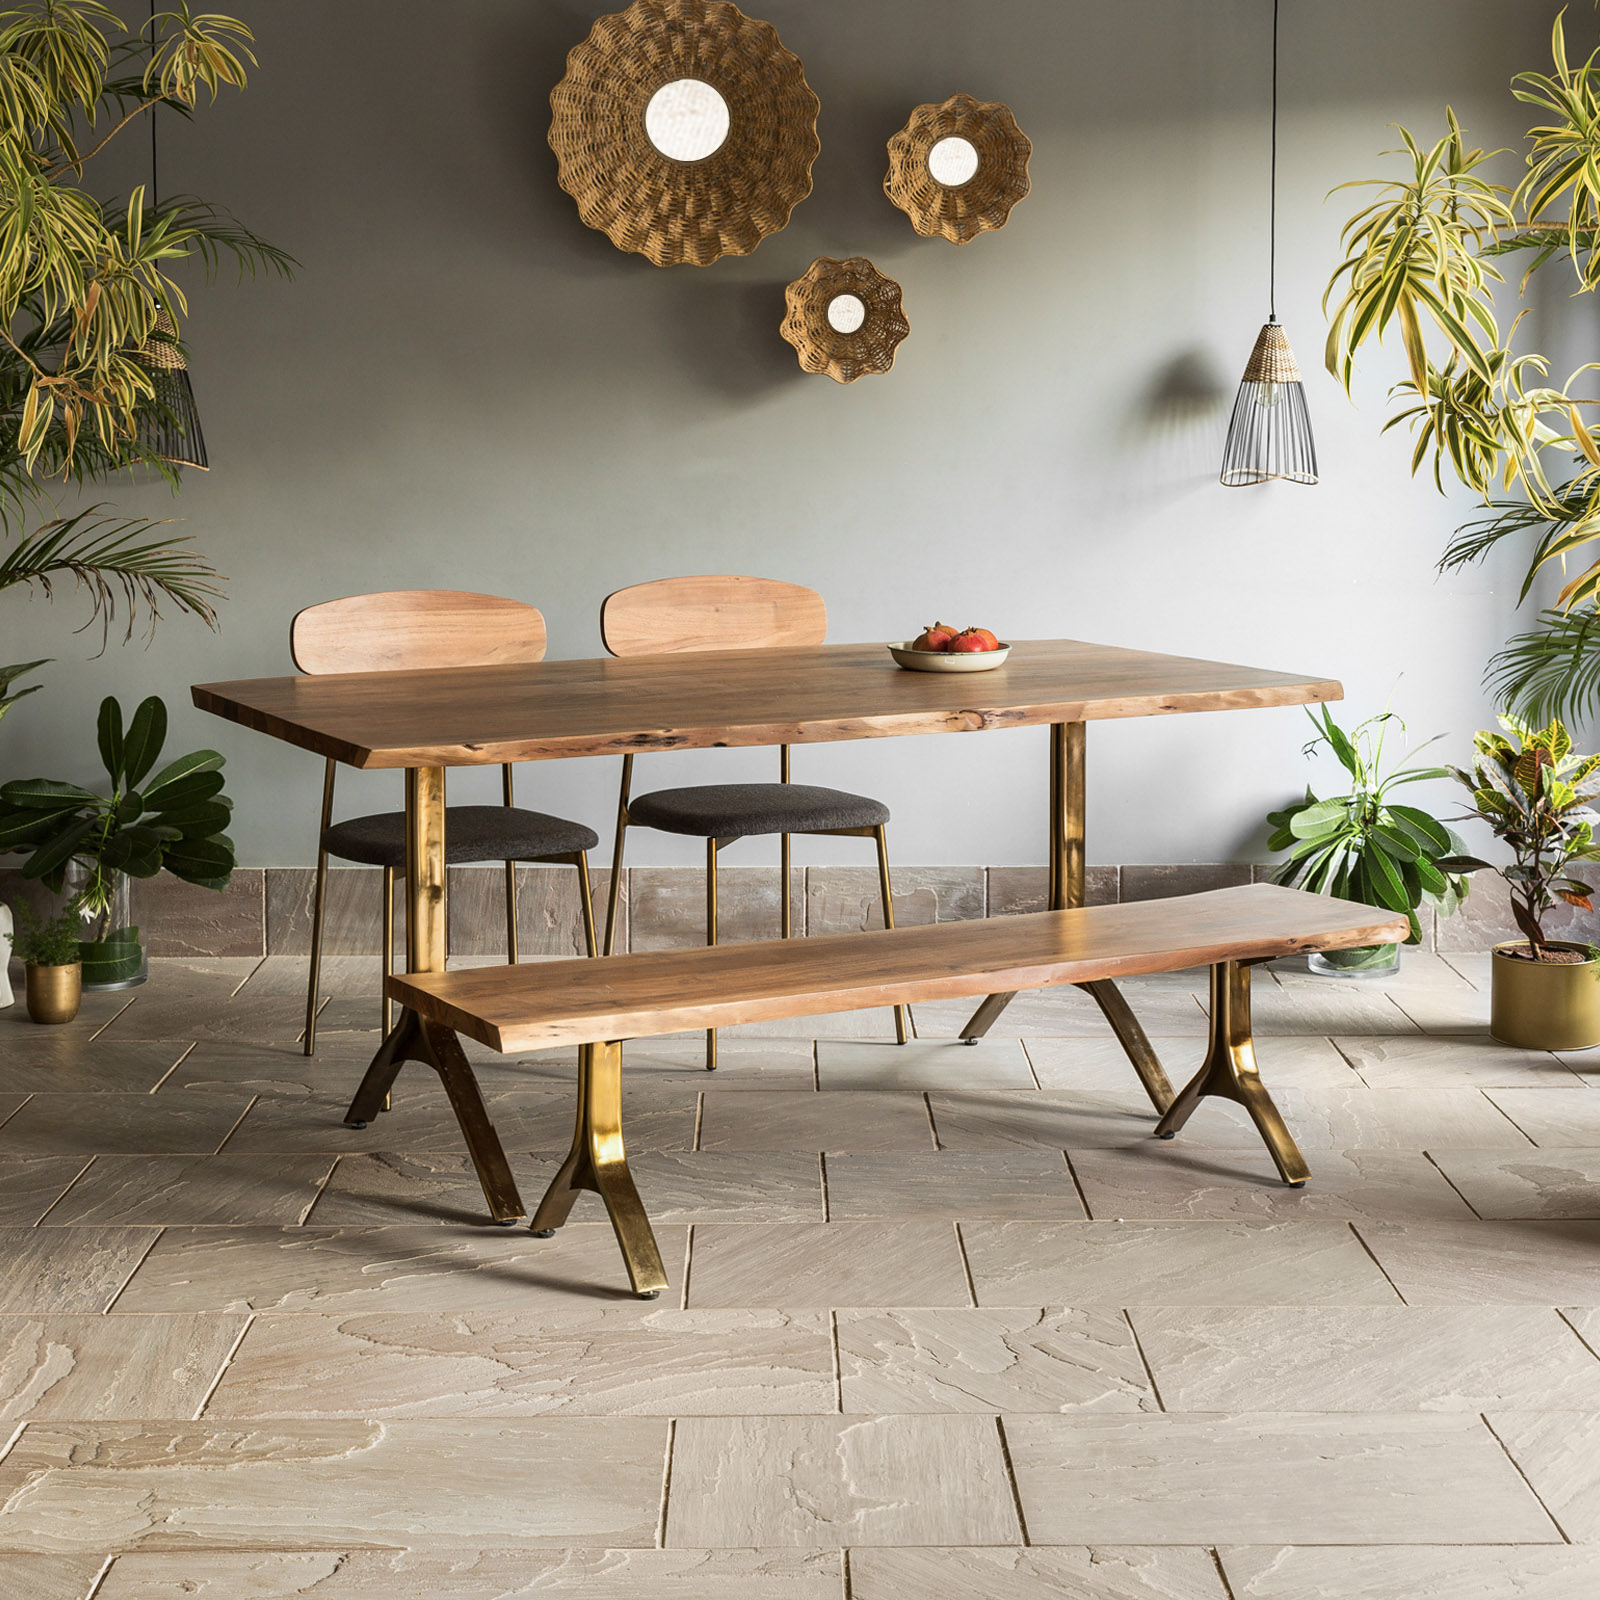 Orange Tree expands its line of products and forays into furniture with the stunning Yoho collection